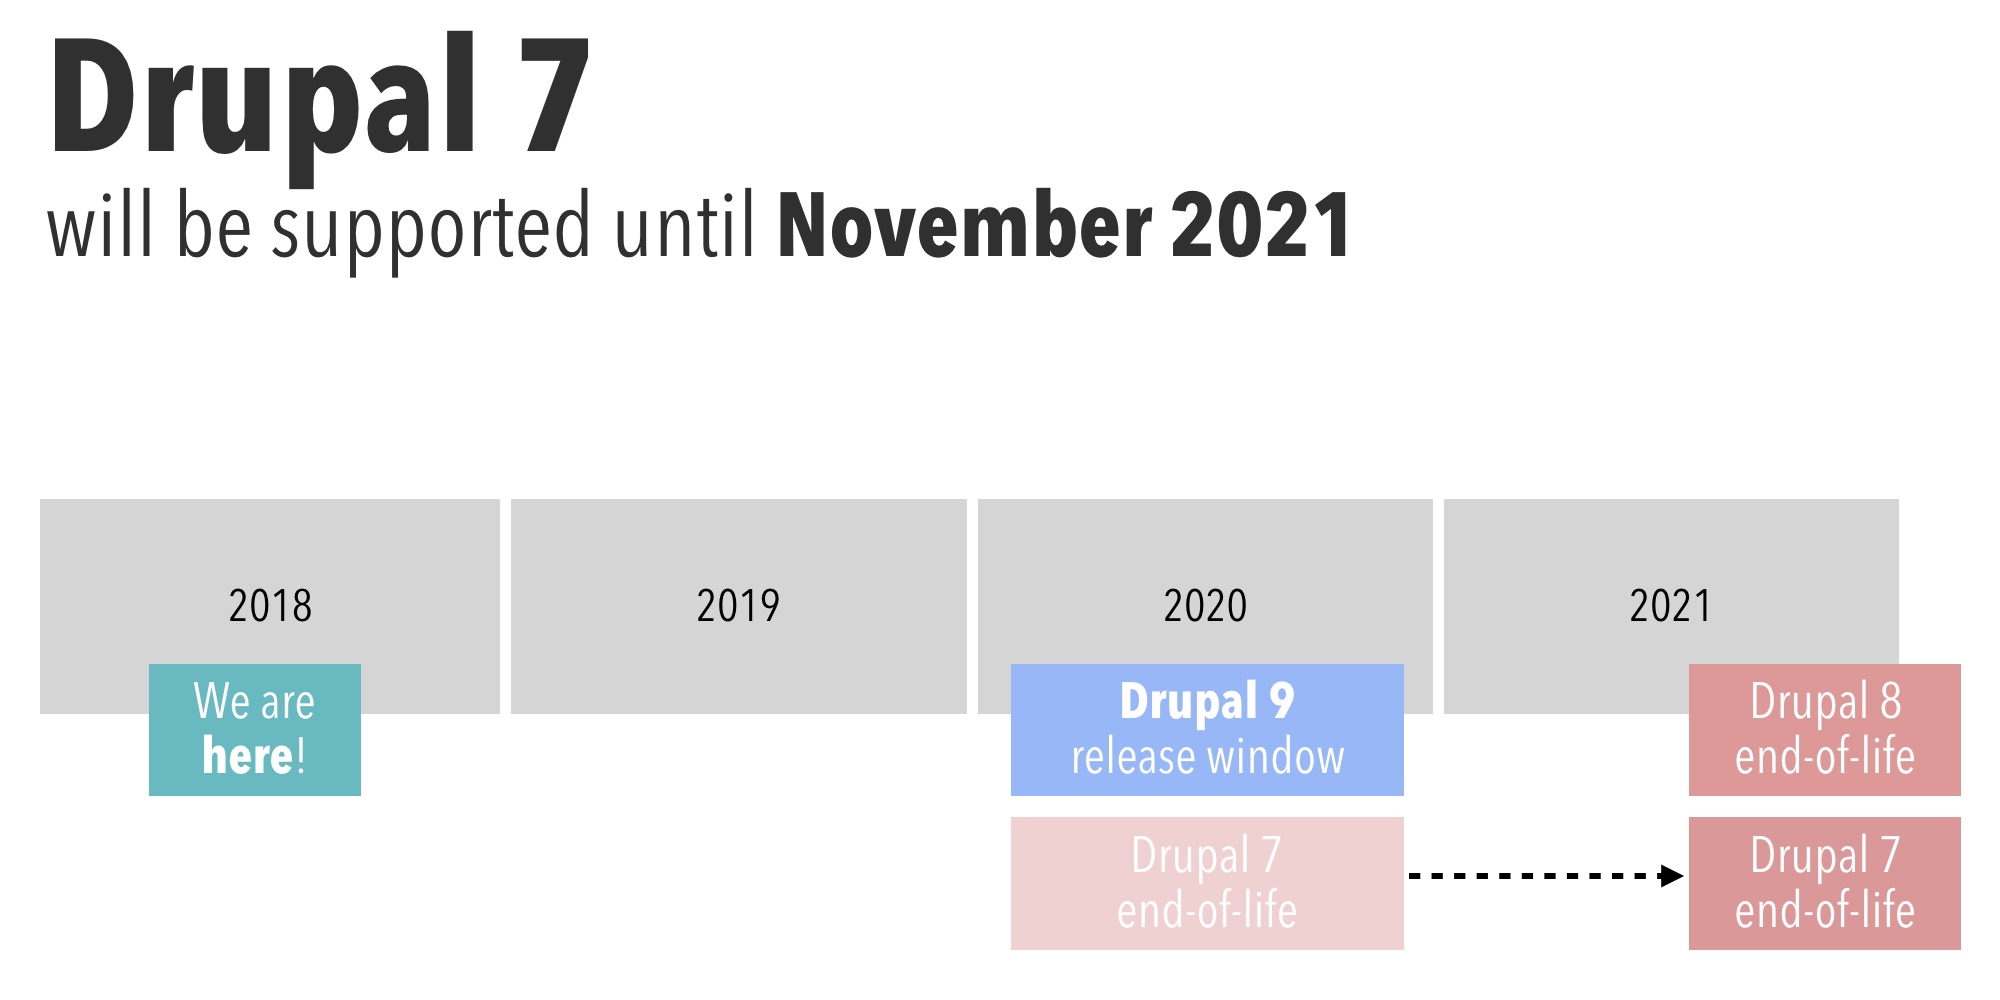 An image that shows that Drupal 7 and Drupal 8 will be end-of-life in 2021